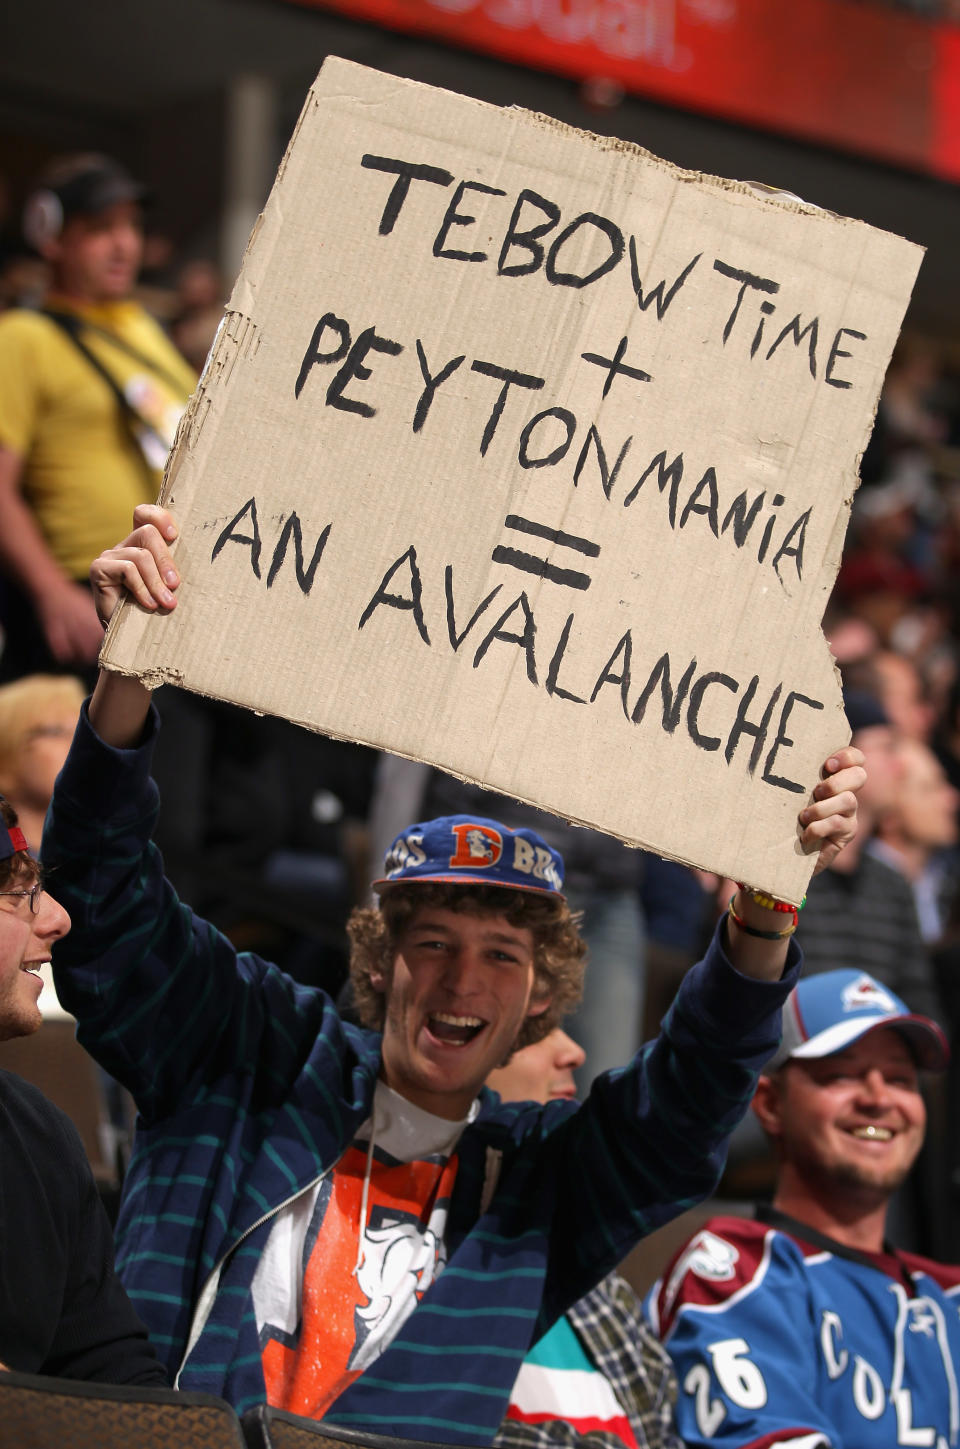 DENVER, CO - MARCH 20: A fan displays a sign referencing Denver Broncos quarterbacks Tim Tebow and Peyton Manning as the Colorado Avalanche host the Calgary Flames at Pepsi Center on March 20, 2012 in Denver, Colorado. (Photo by Doug Pensinger/Getty Images)